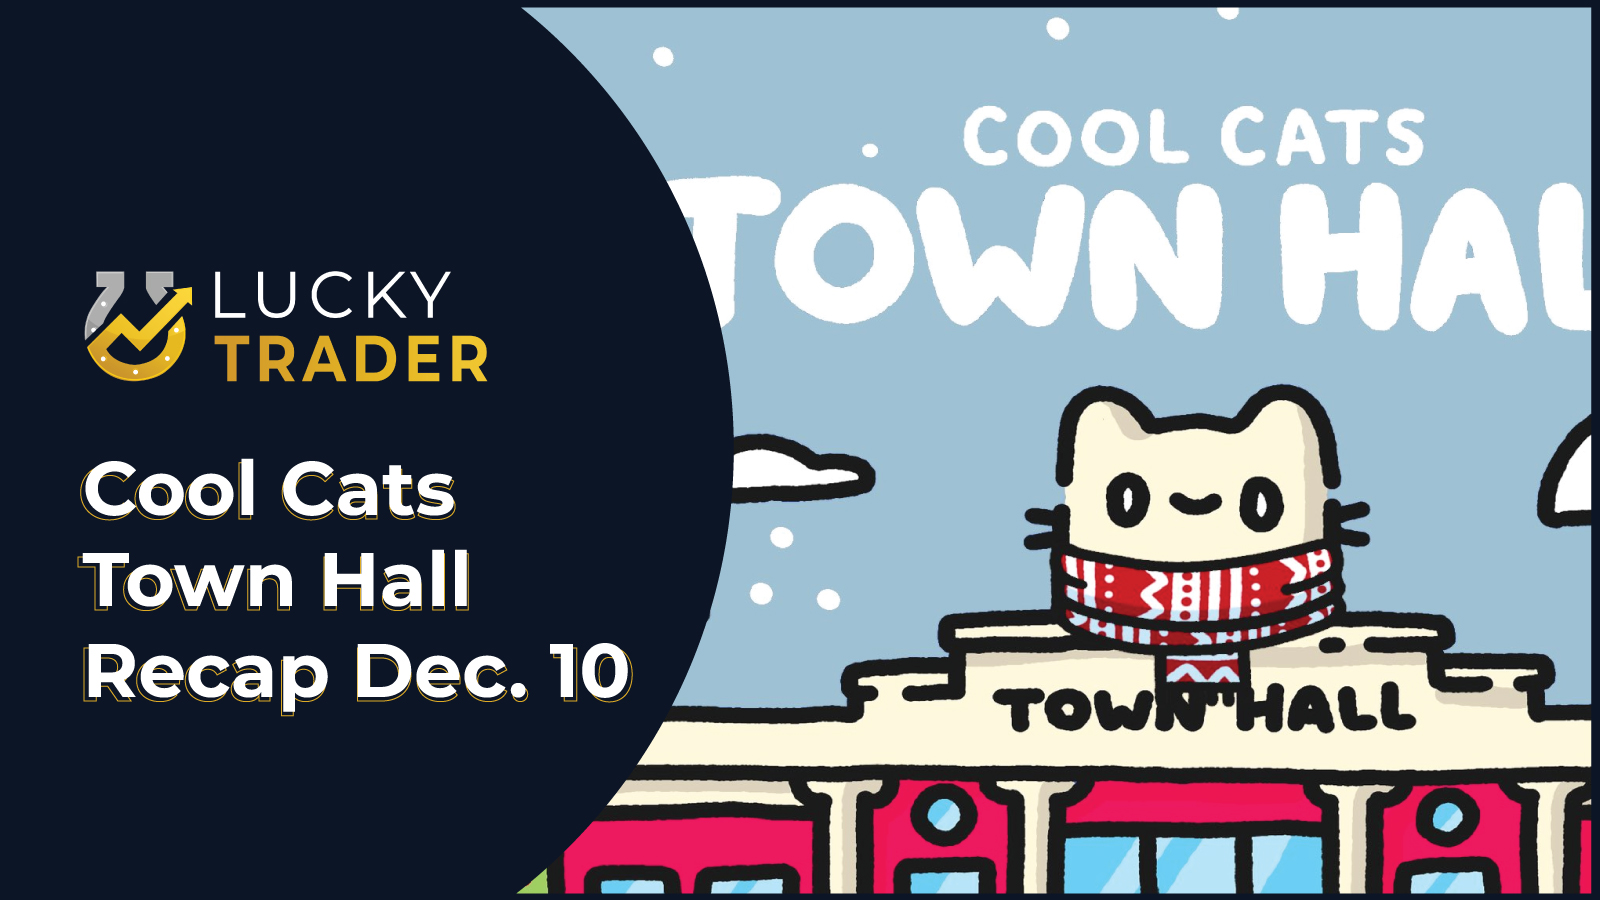 ICYMI: Cool Cats Town Hall Meeting Summary